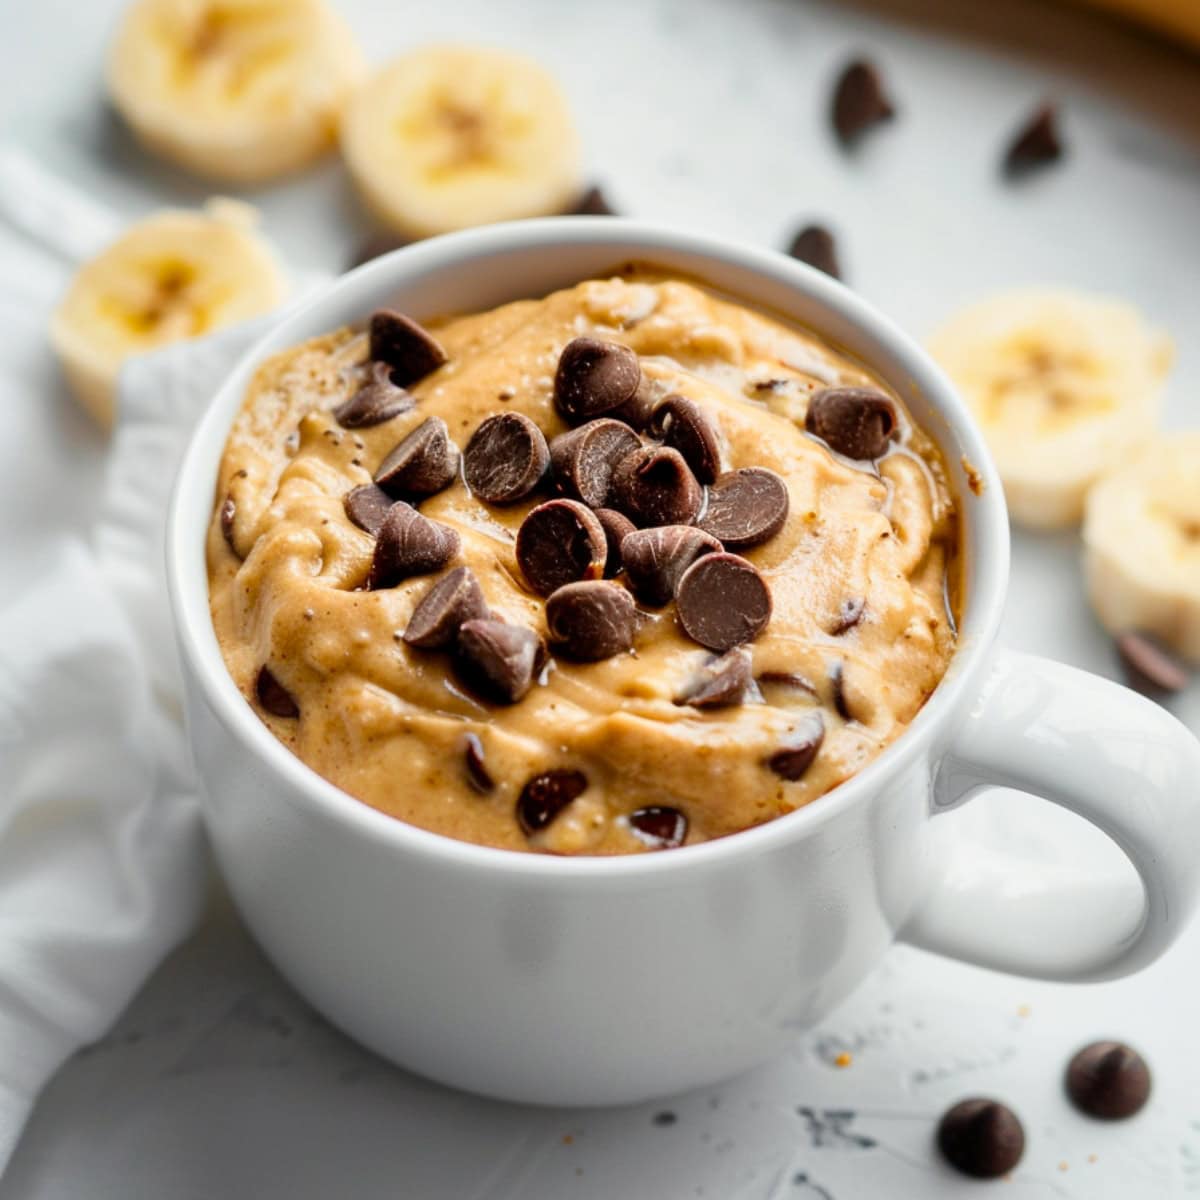 Banana cake batter topped with chocolate chips in a white mug.